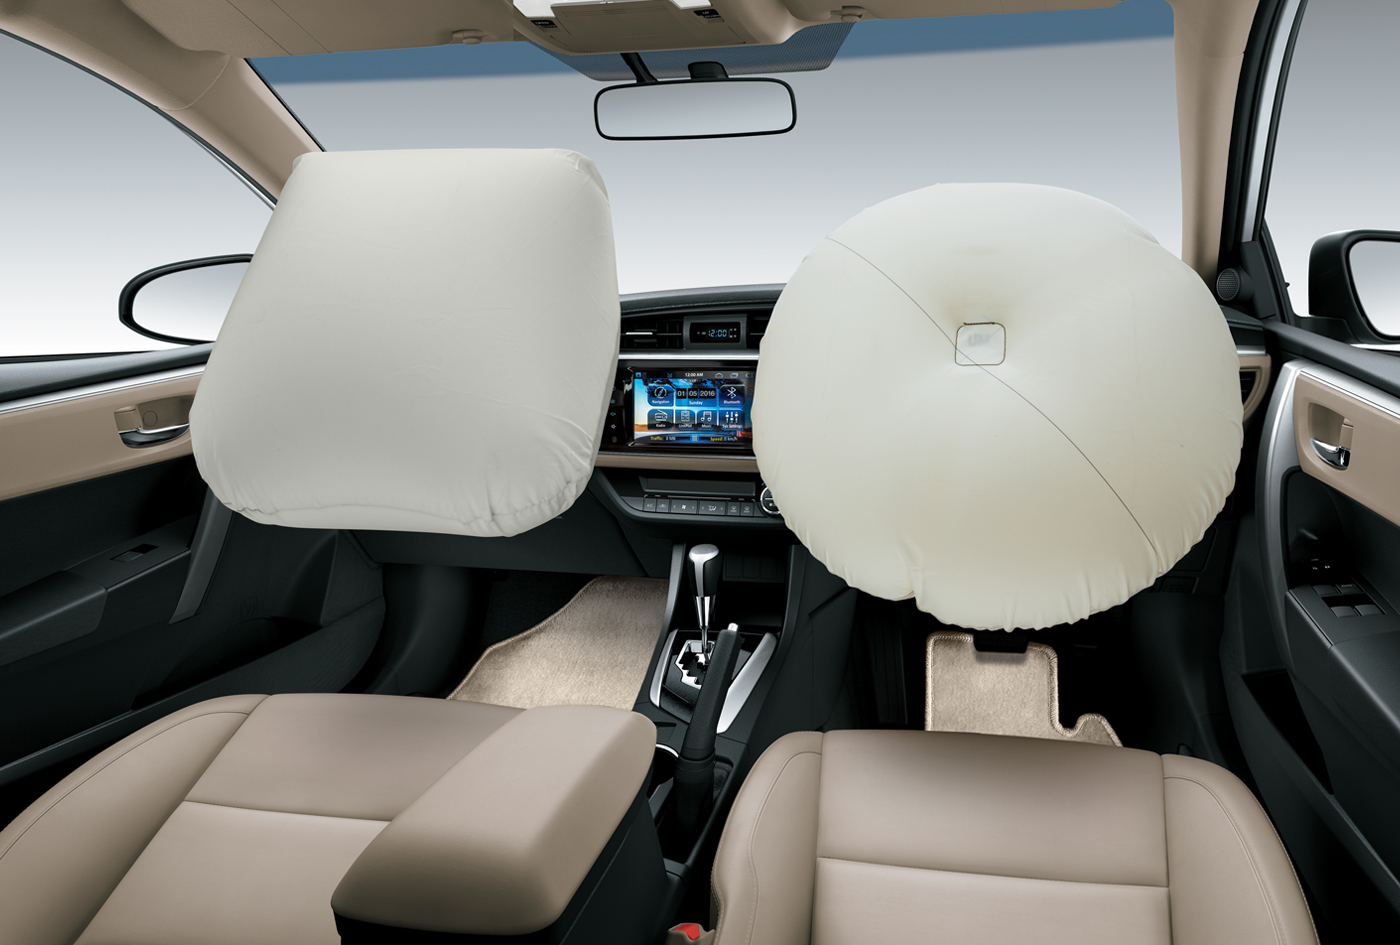 Dual Front SRS Airbag